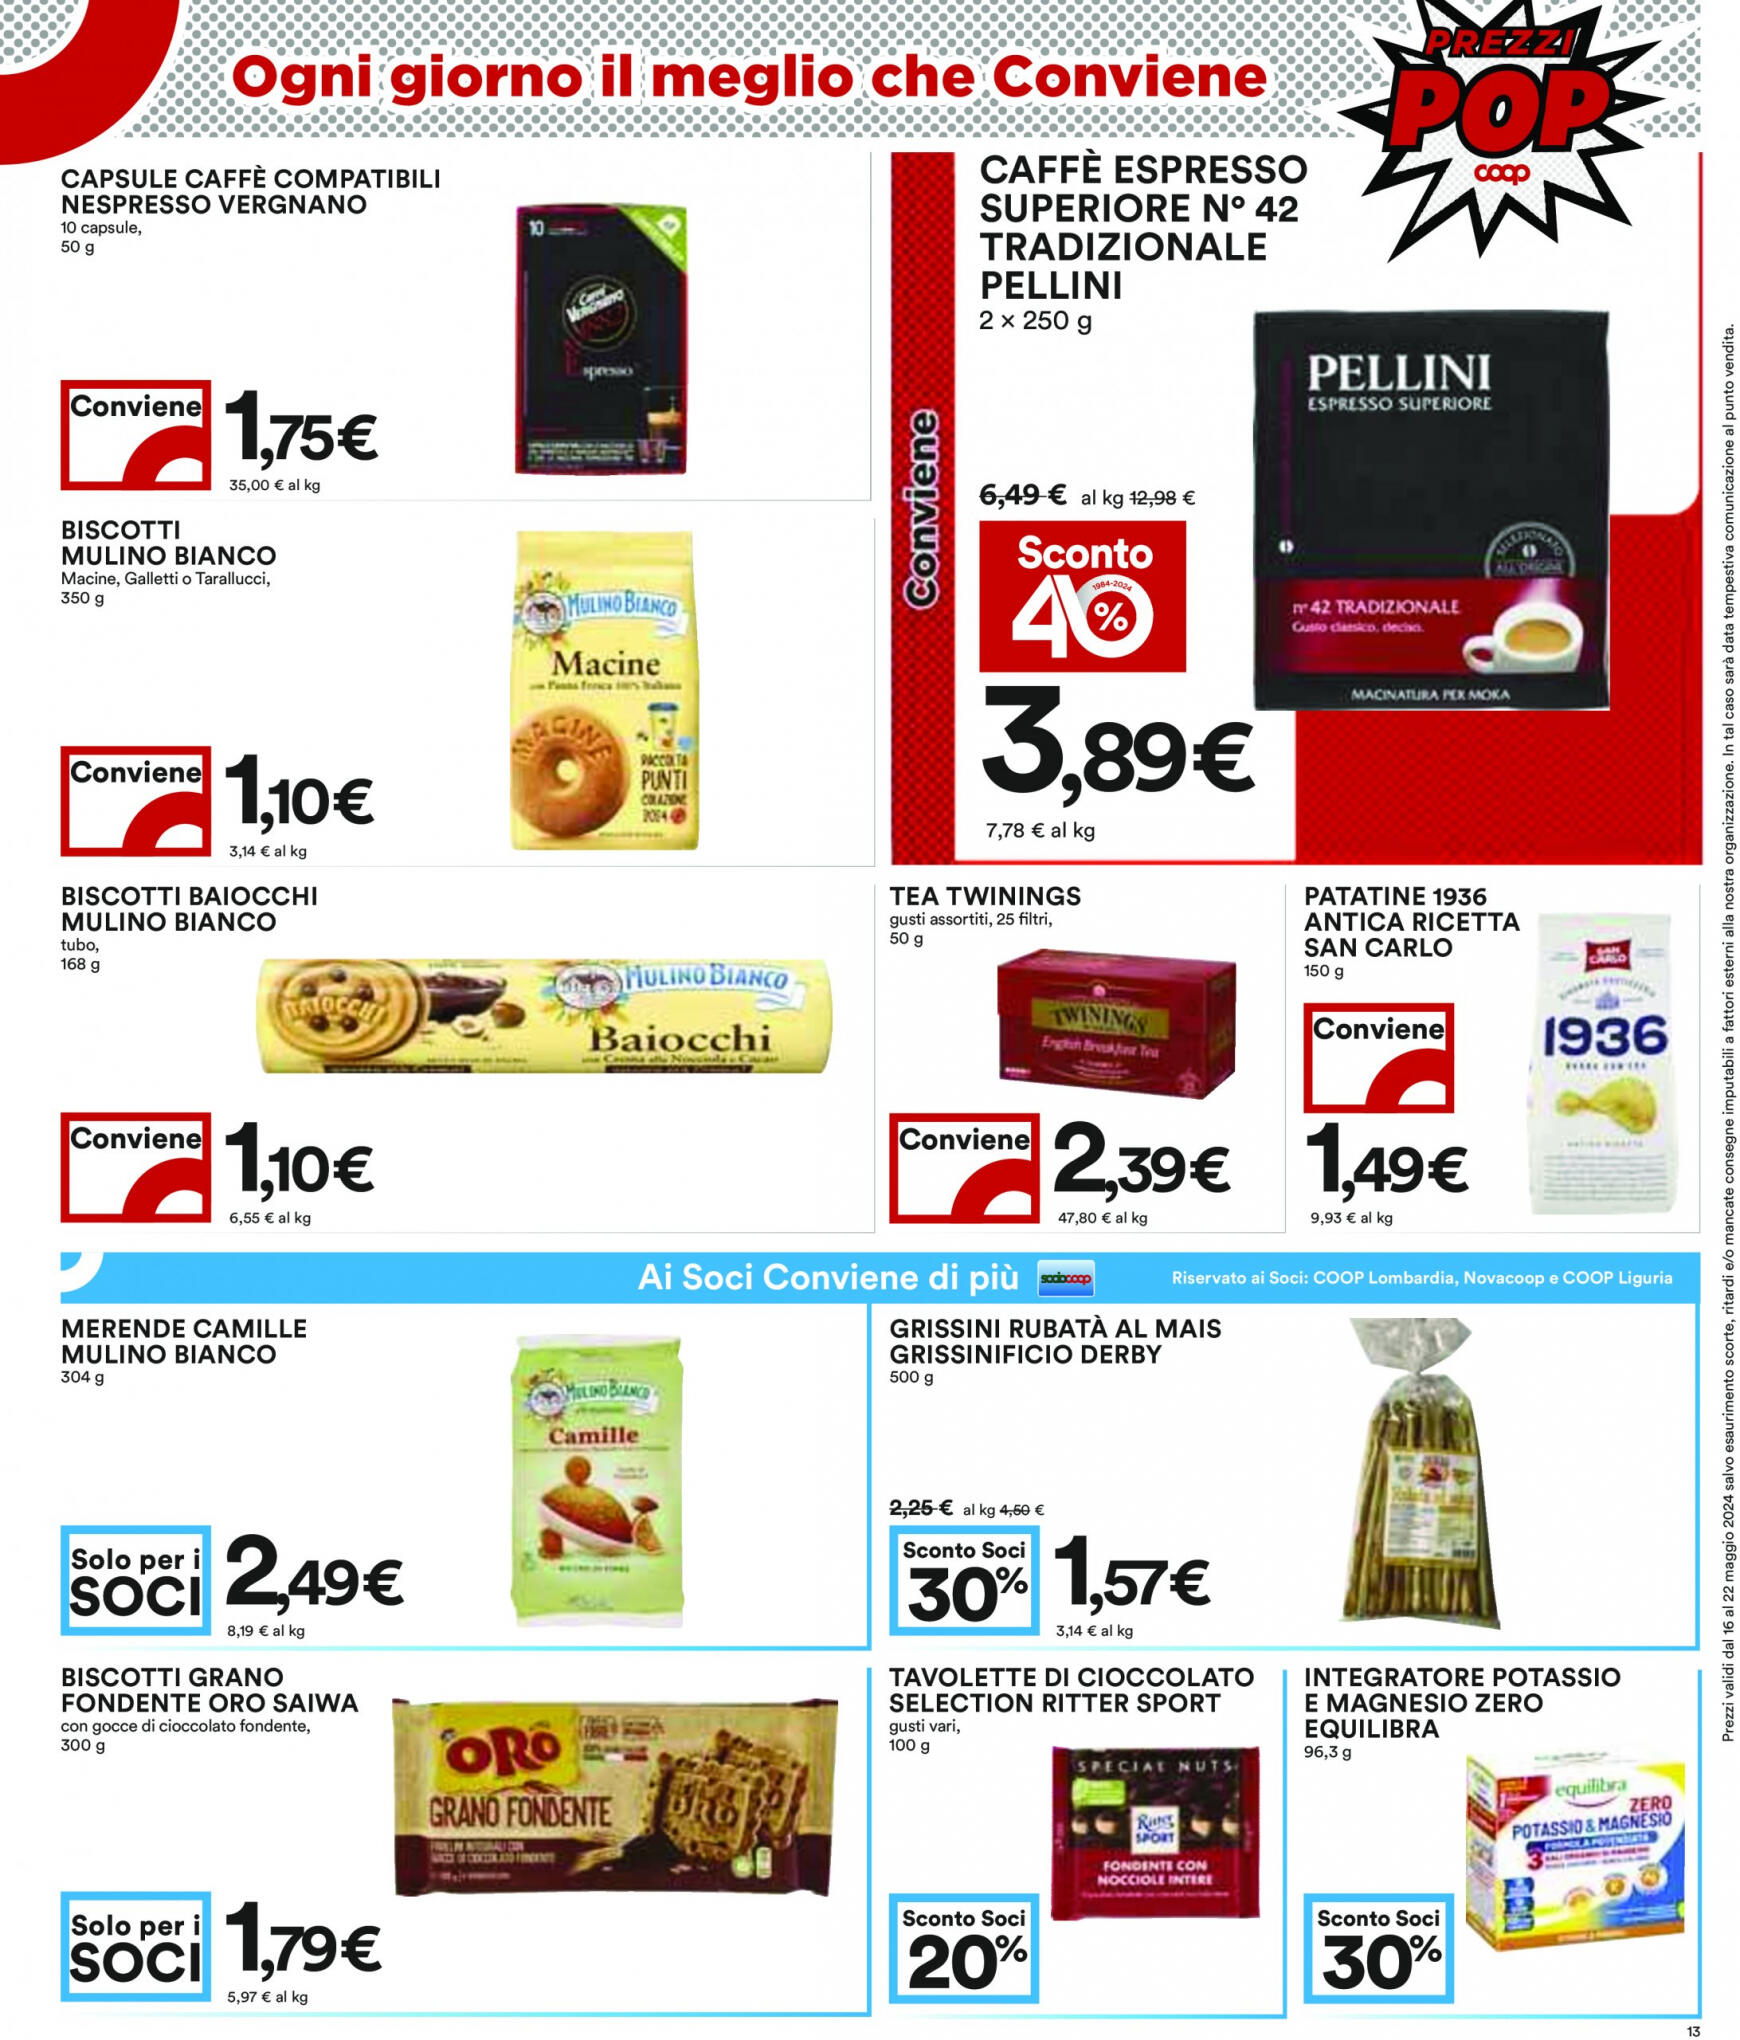 coop - Nuovo volantino Coop 16.05. - 22.05. - page: 13